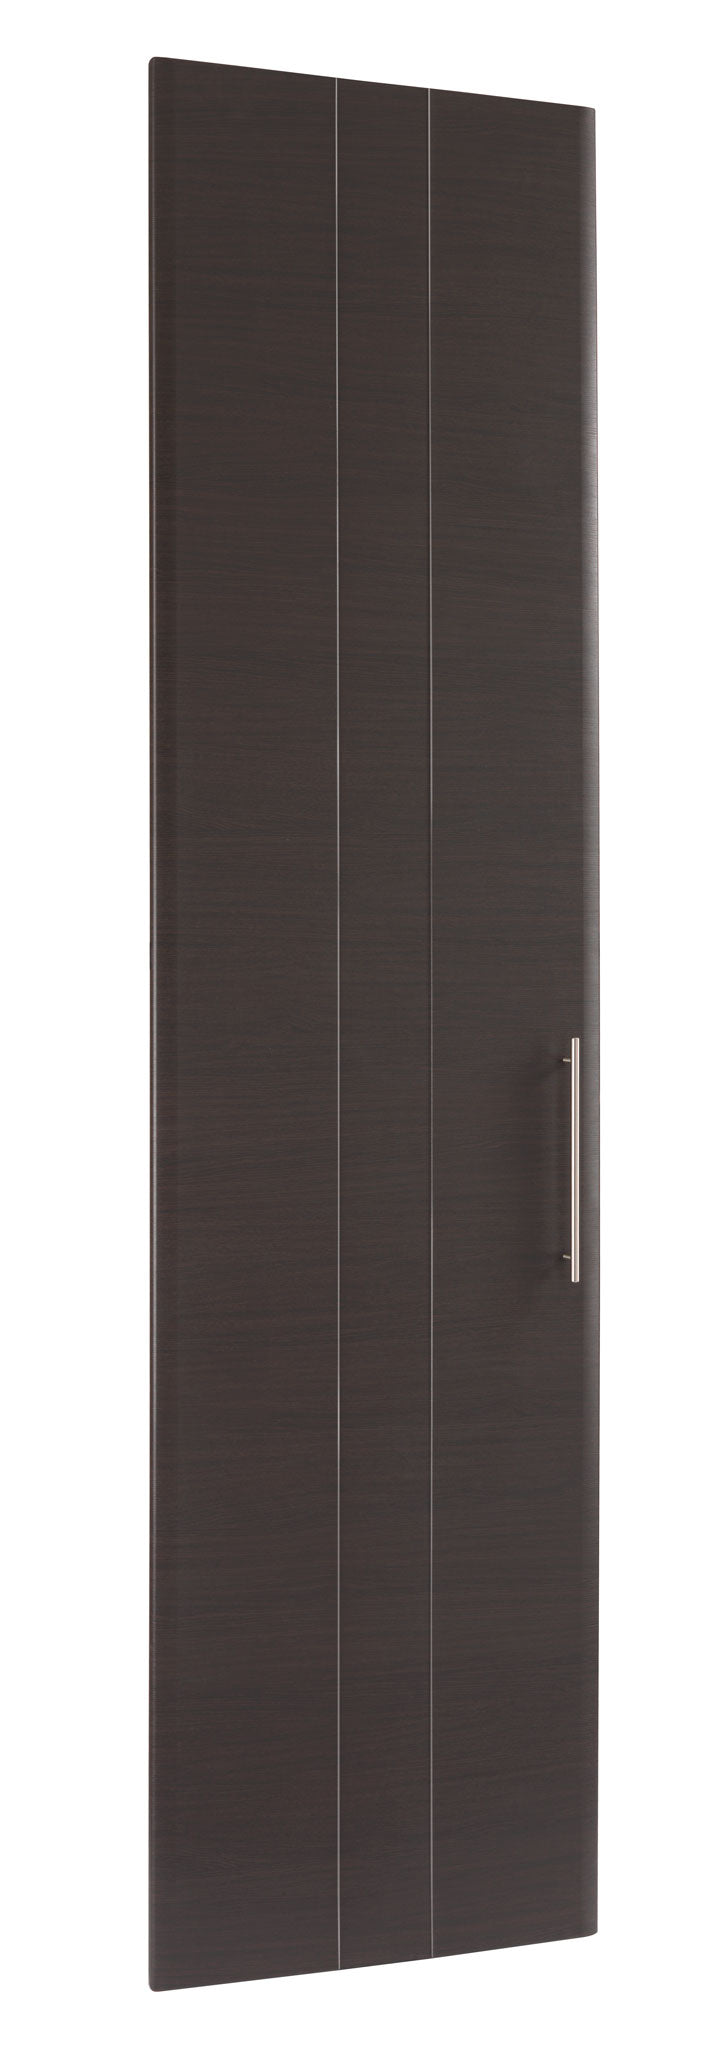 Grove style cupboard door in any colour